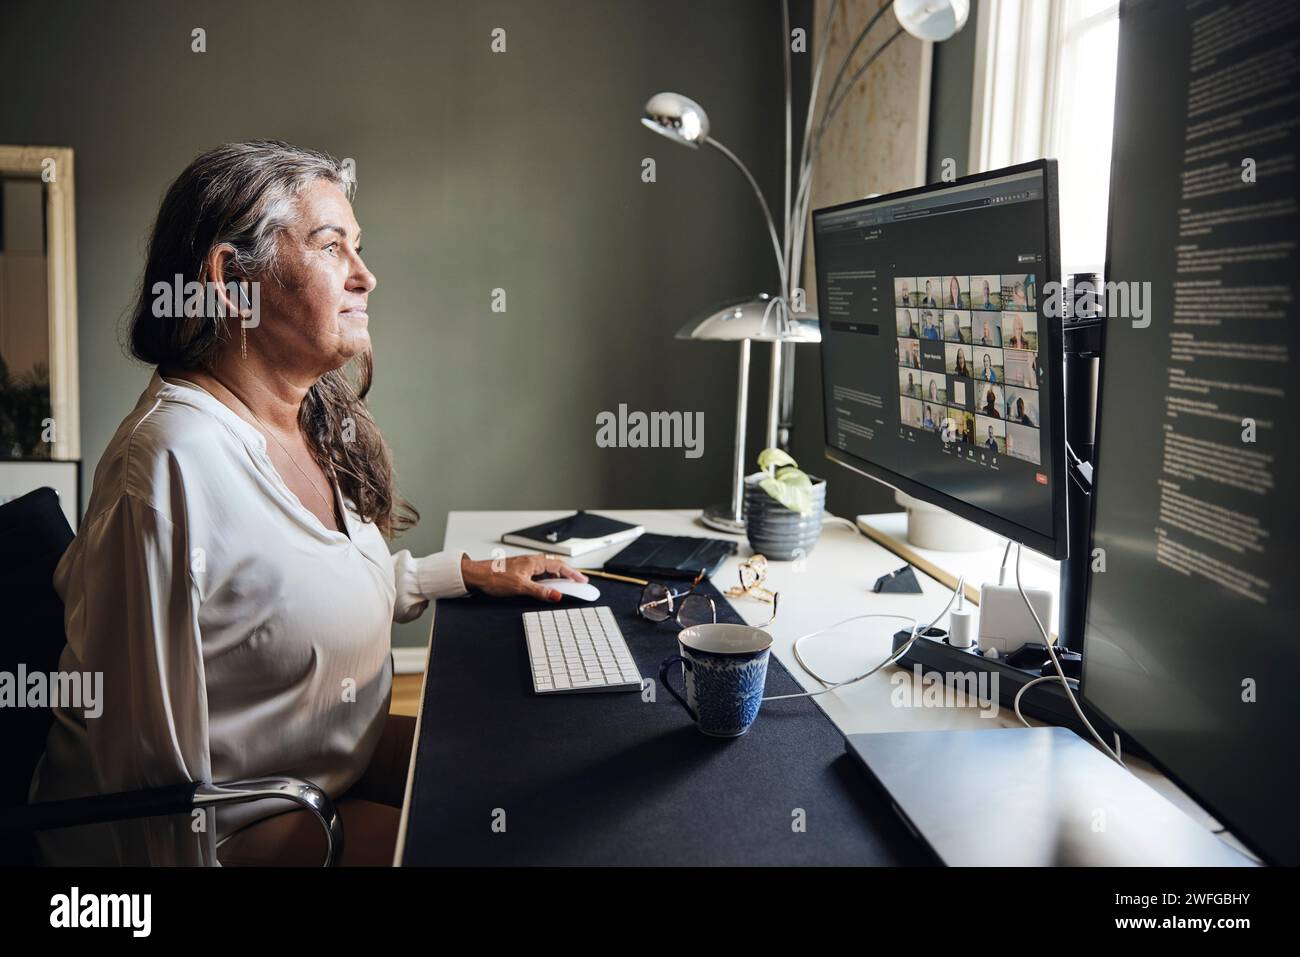 Businesswoman doing video conference through computer while sitting at desk in home office Stock Photo